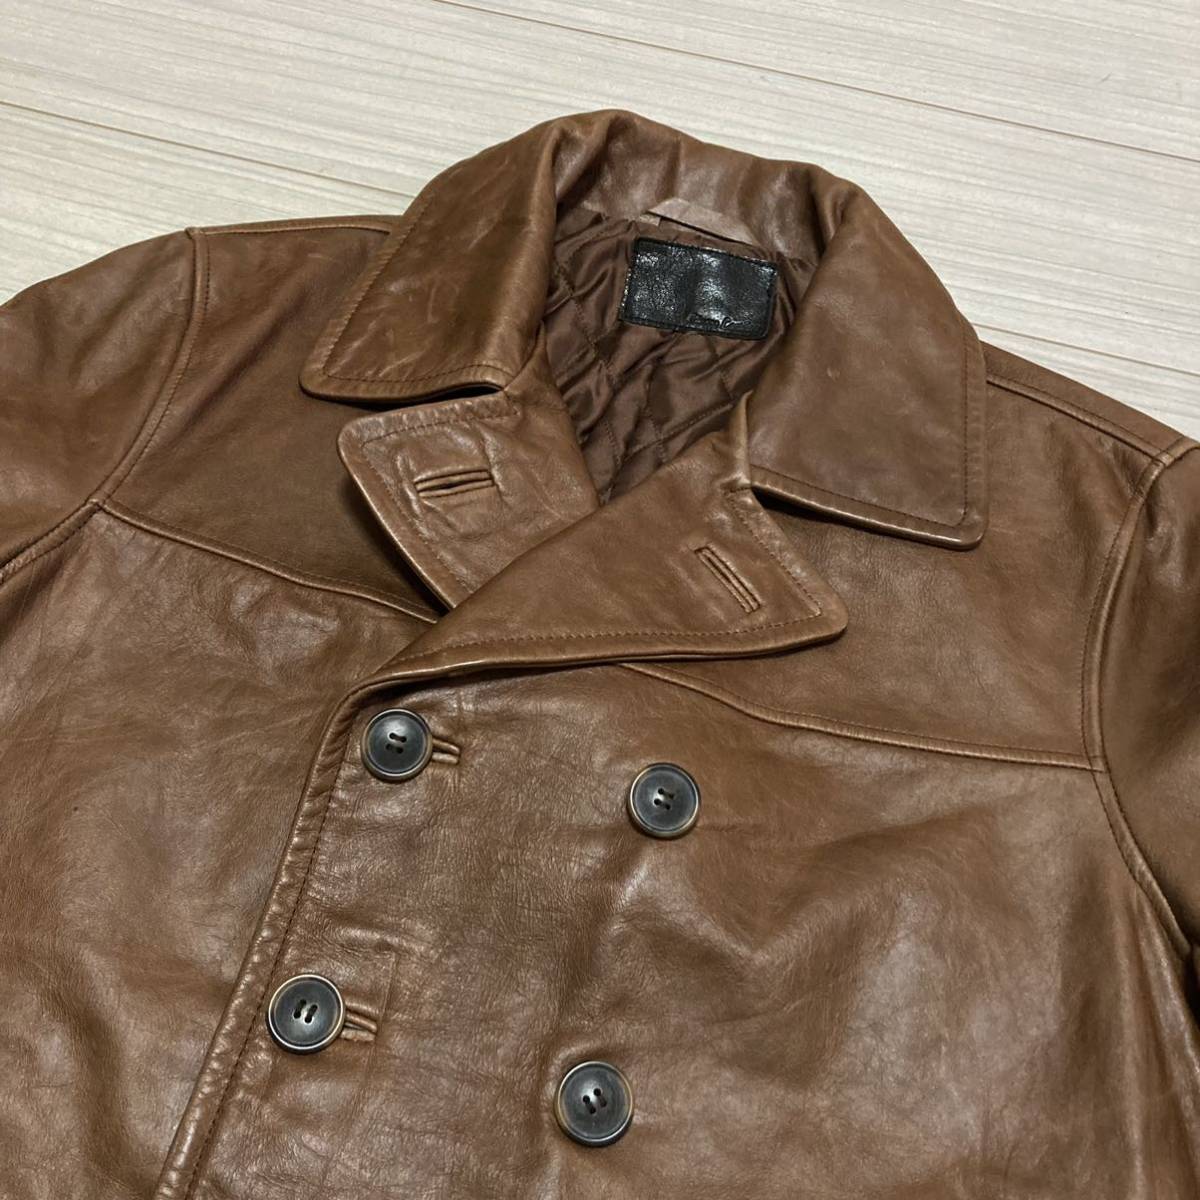  superior article #Liugoo Leathers# horse leather Horse Hyde pea coat L tea Brown cotton inside quilting leather pea coat jacket dragon g- leather z